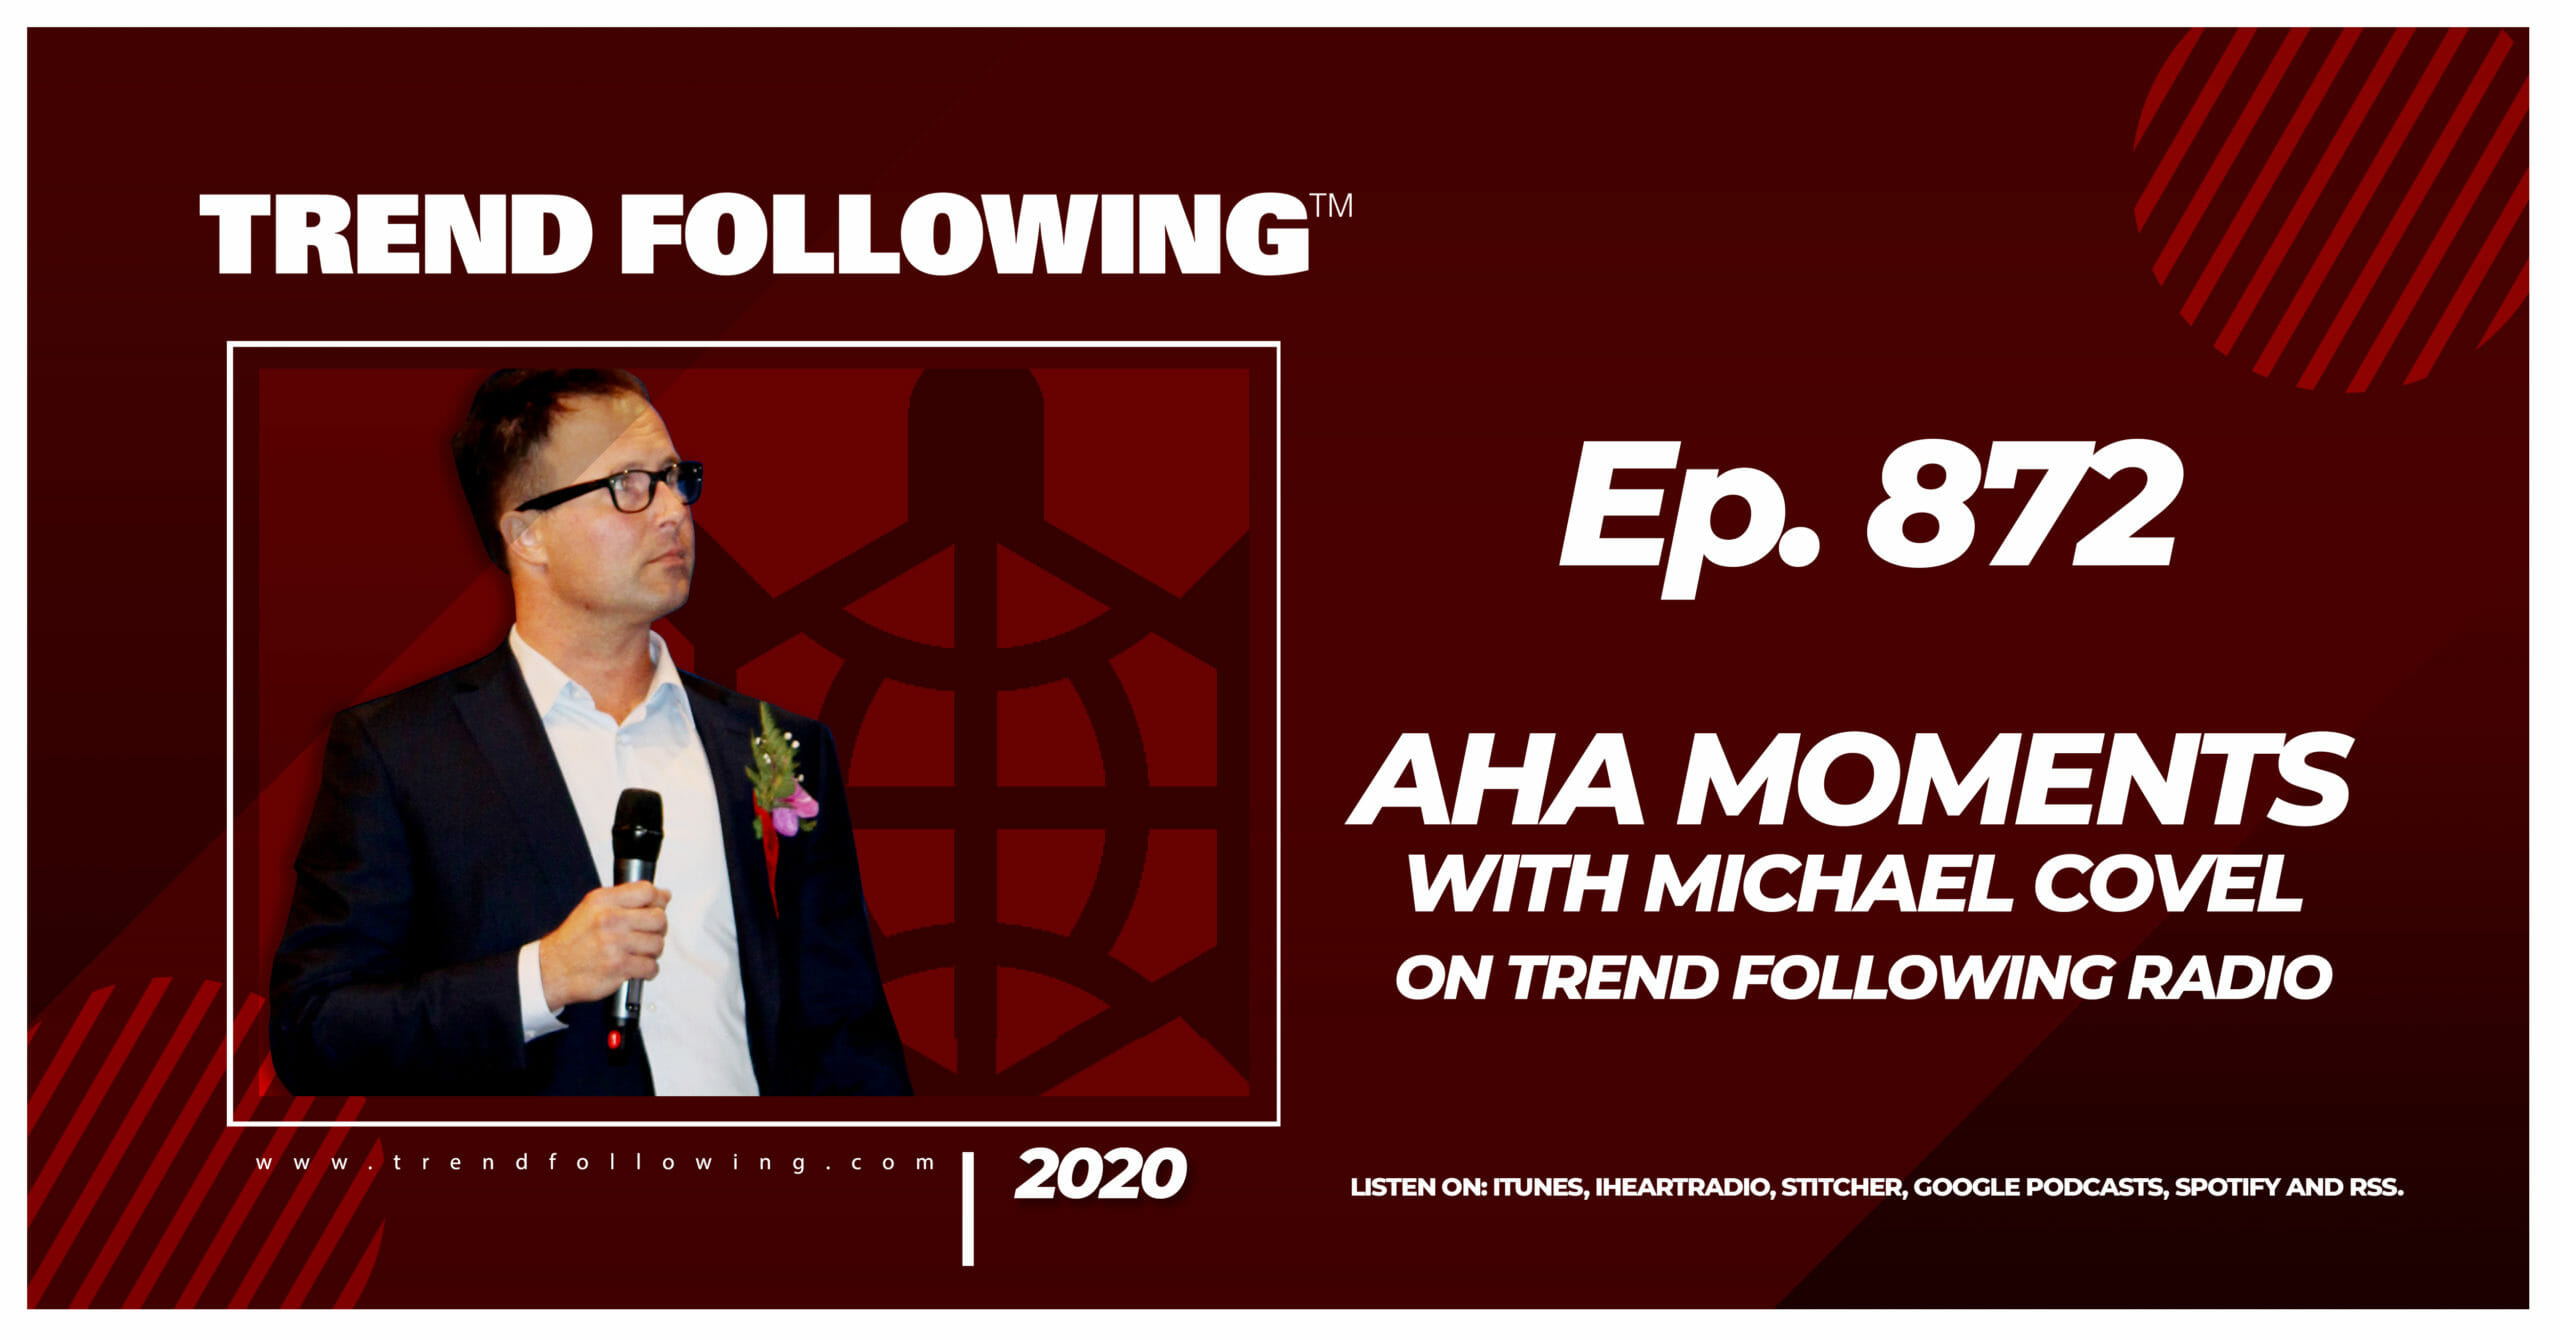 Aha Moments with Michael Covel on Trend Following Radio